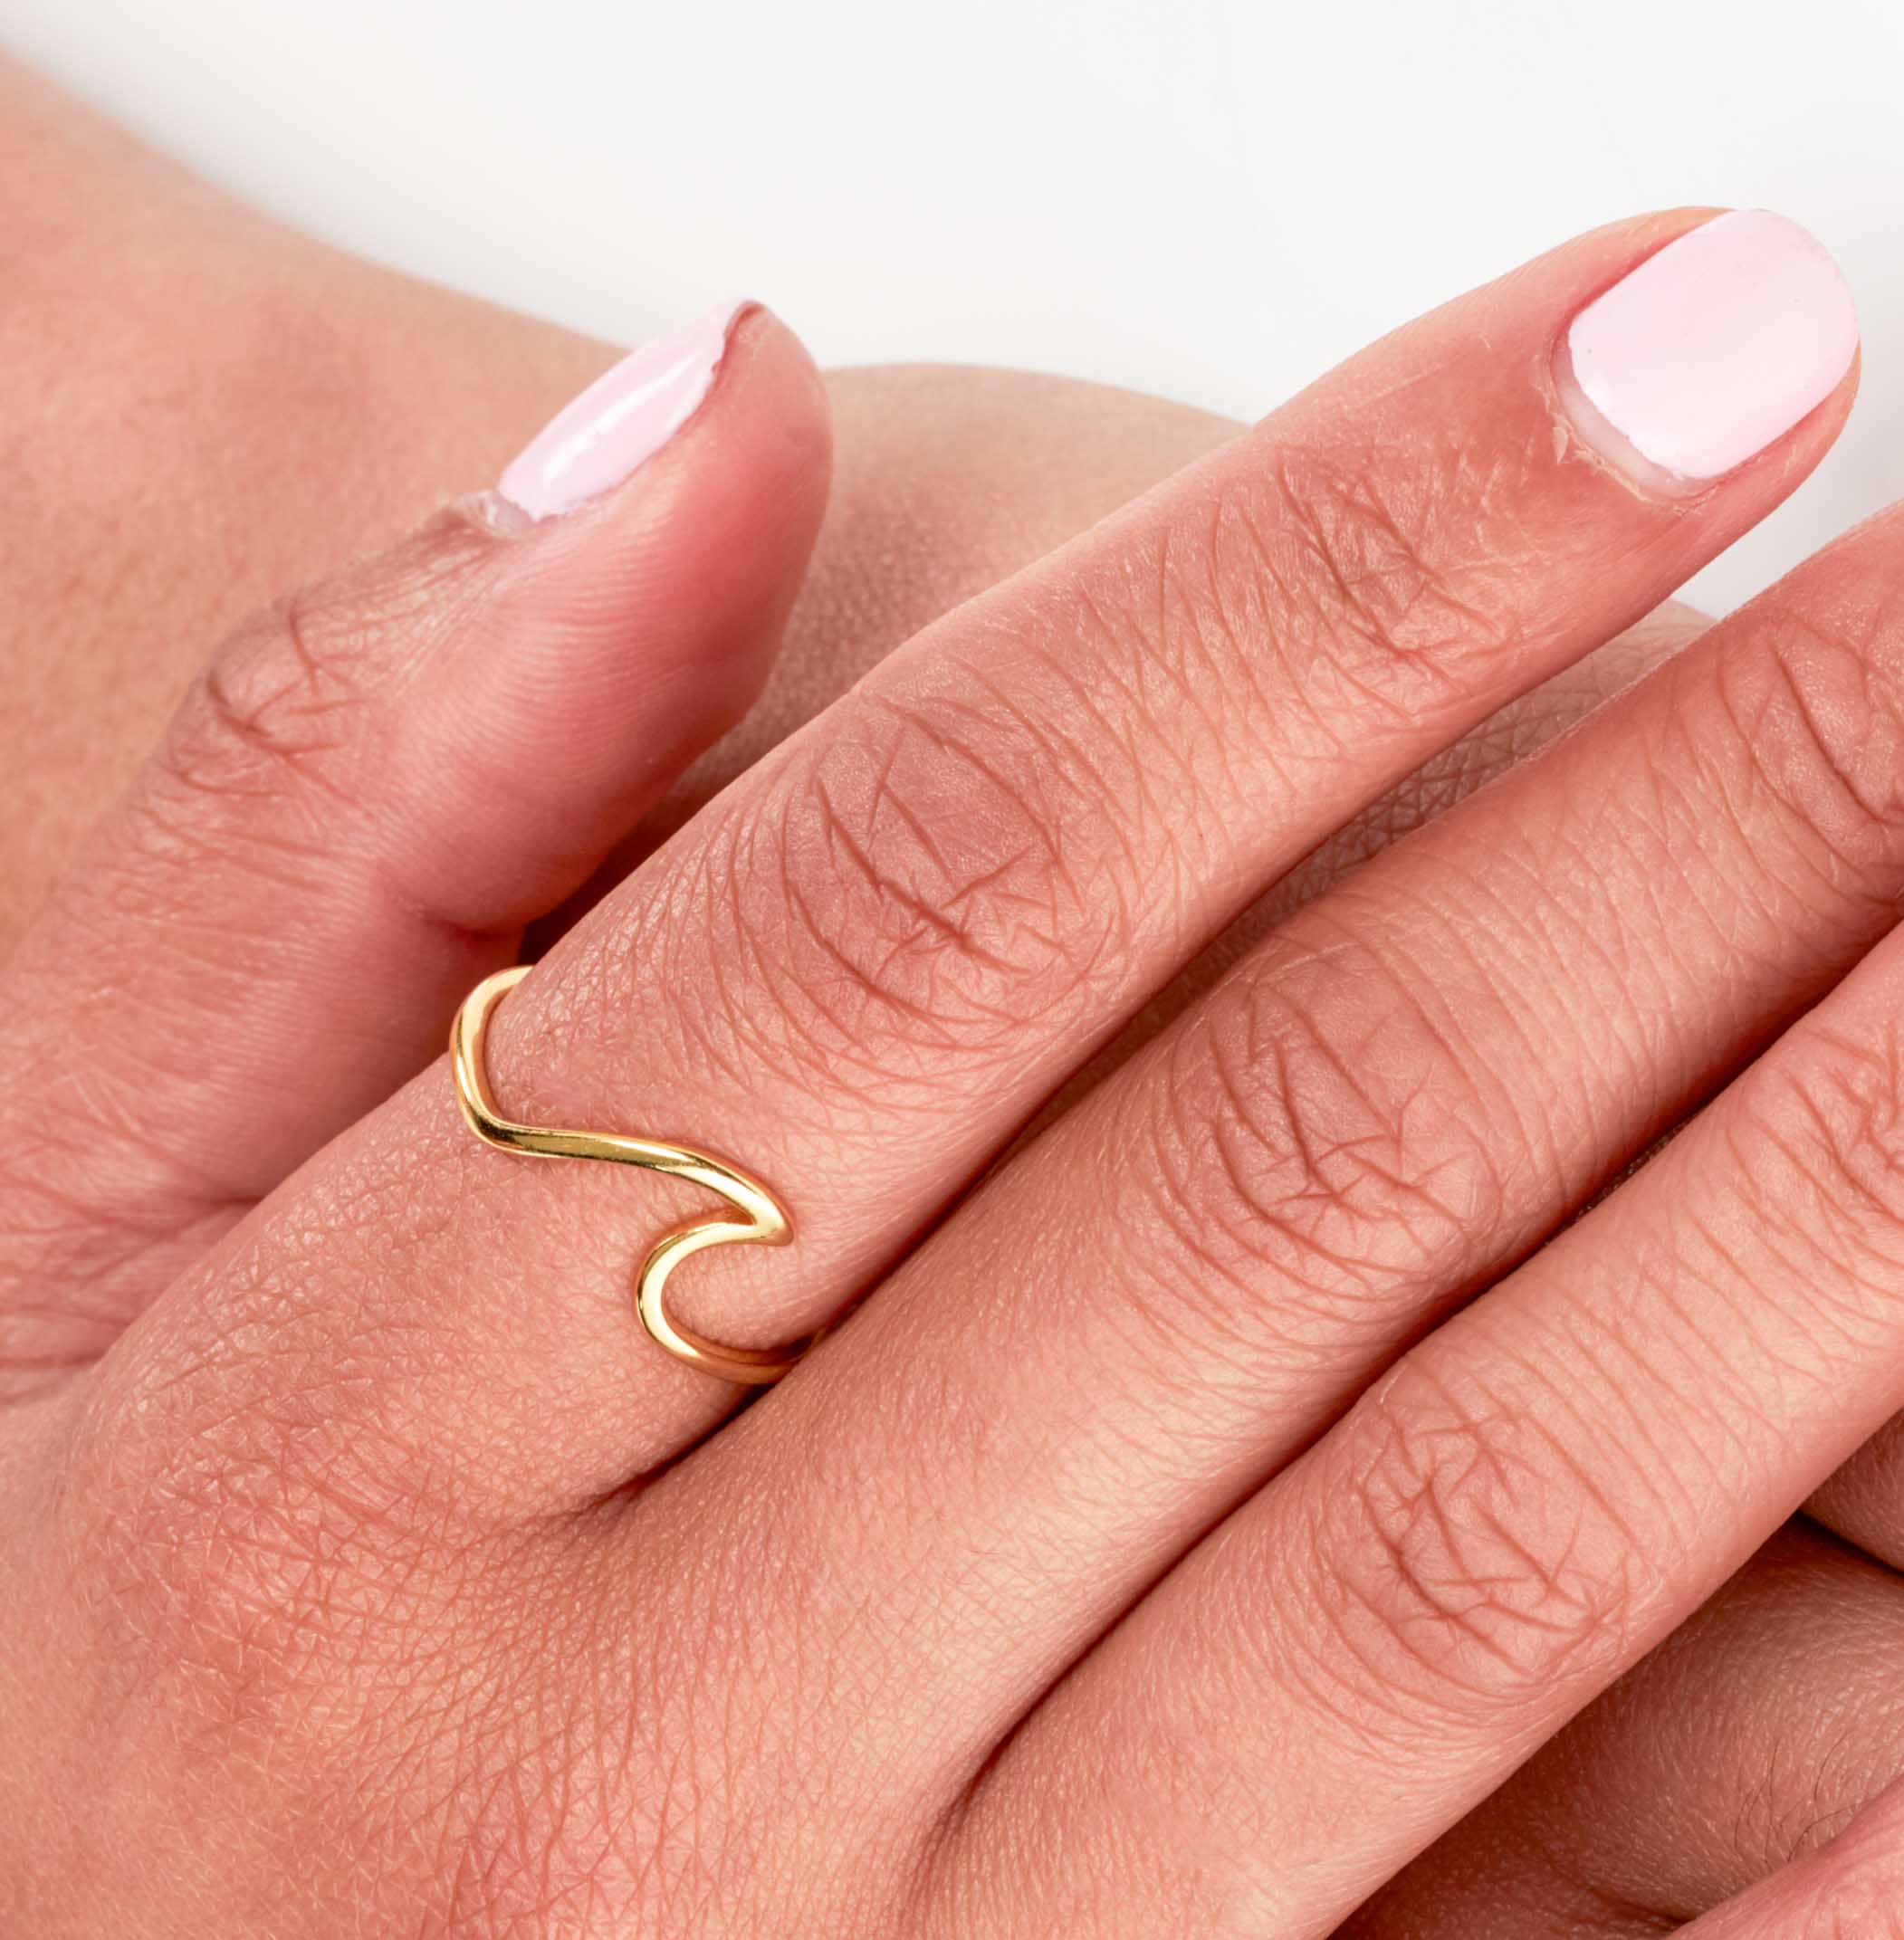 Ocean Wave Ring - 18k Gold plated stainless steel - Ocean Wave Jewelry